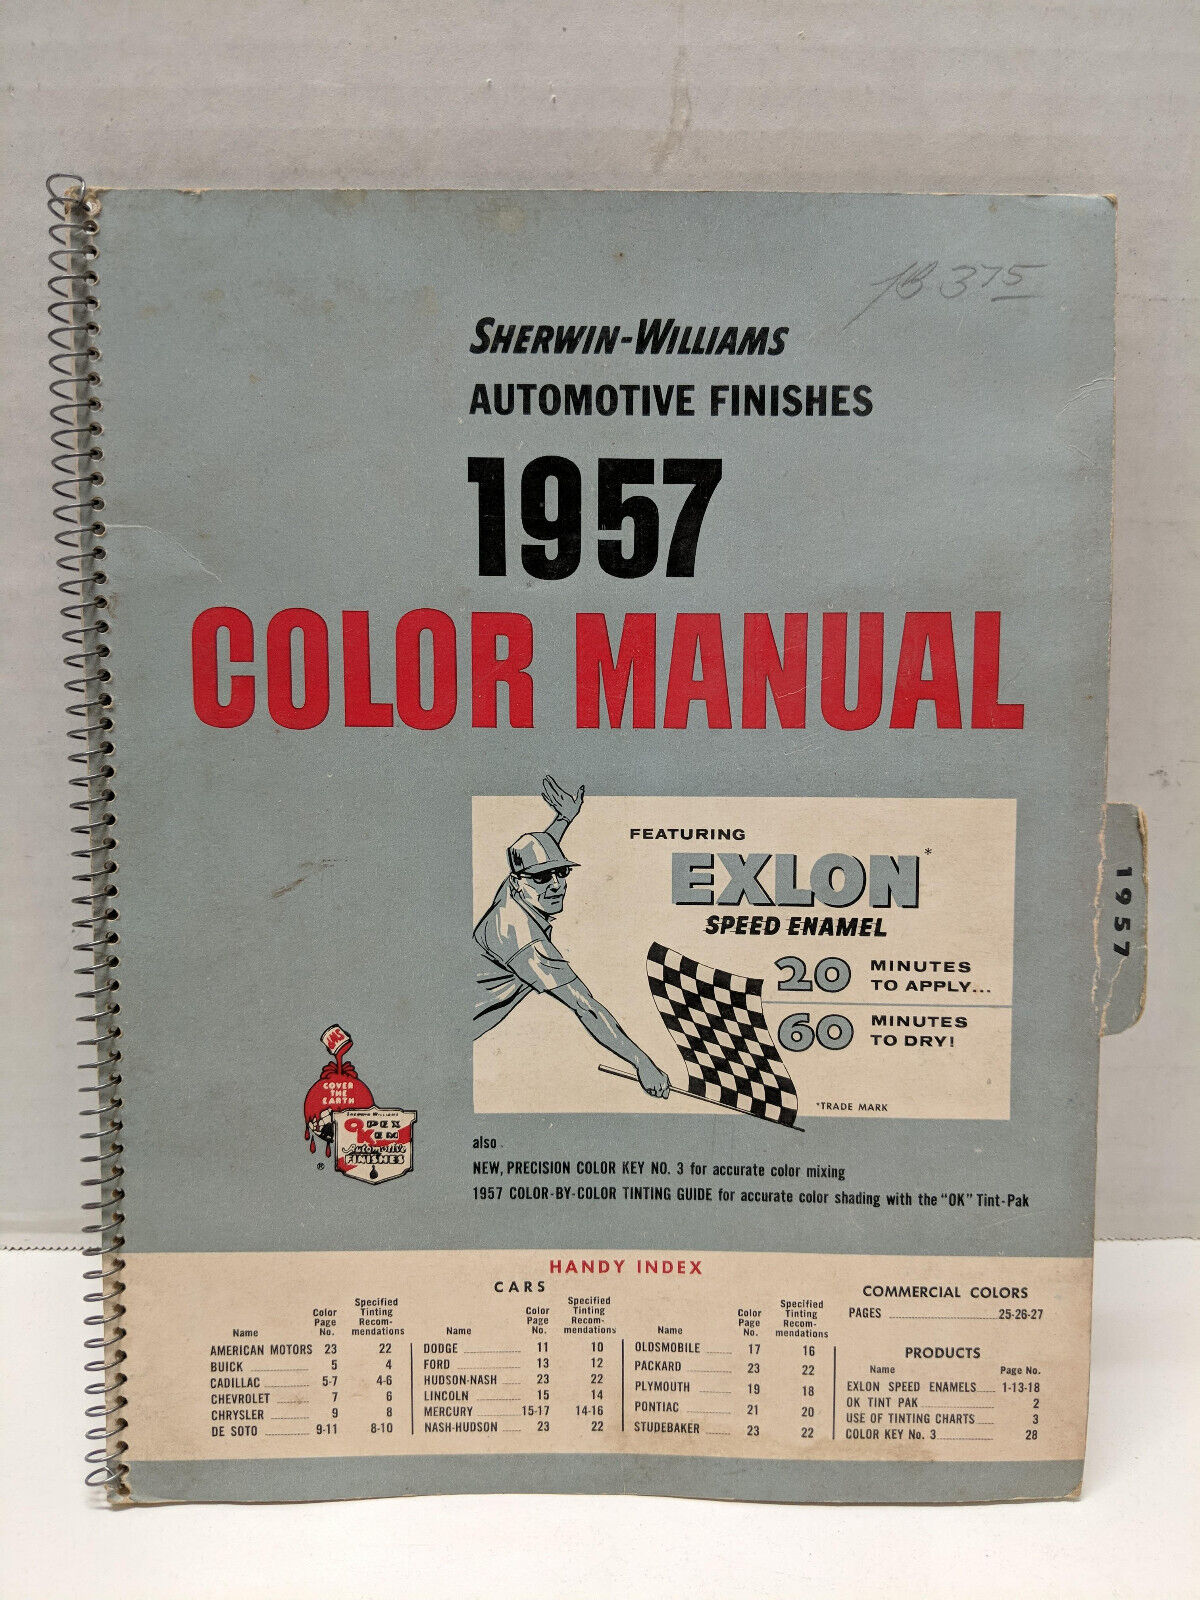 Sherwin Williams Automotive Finishes 1957 Color Manual AMC Chrysler Ford GM